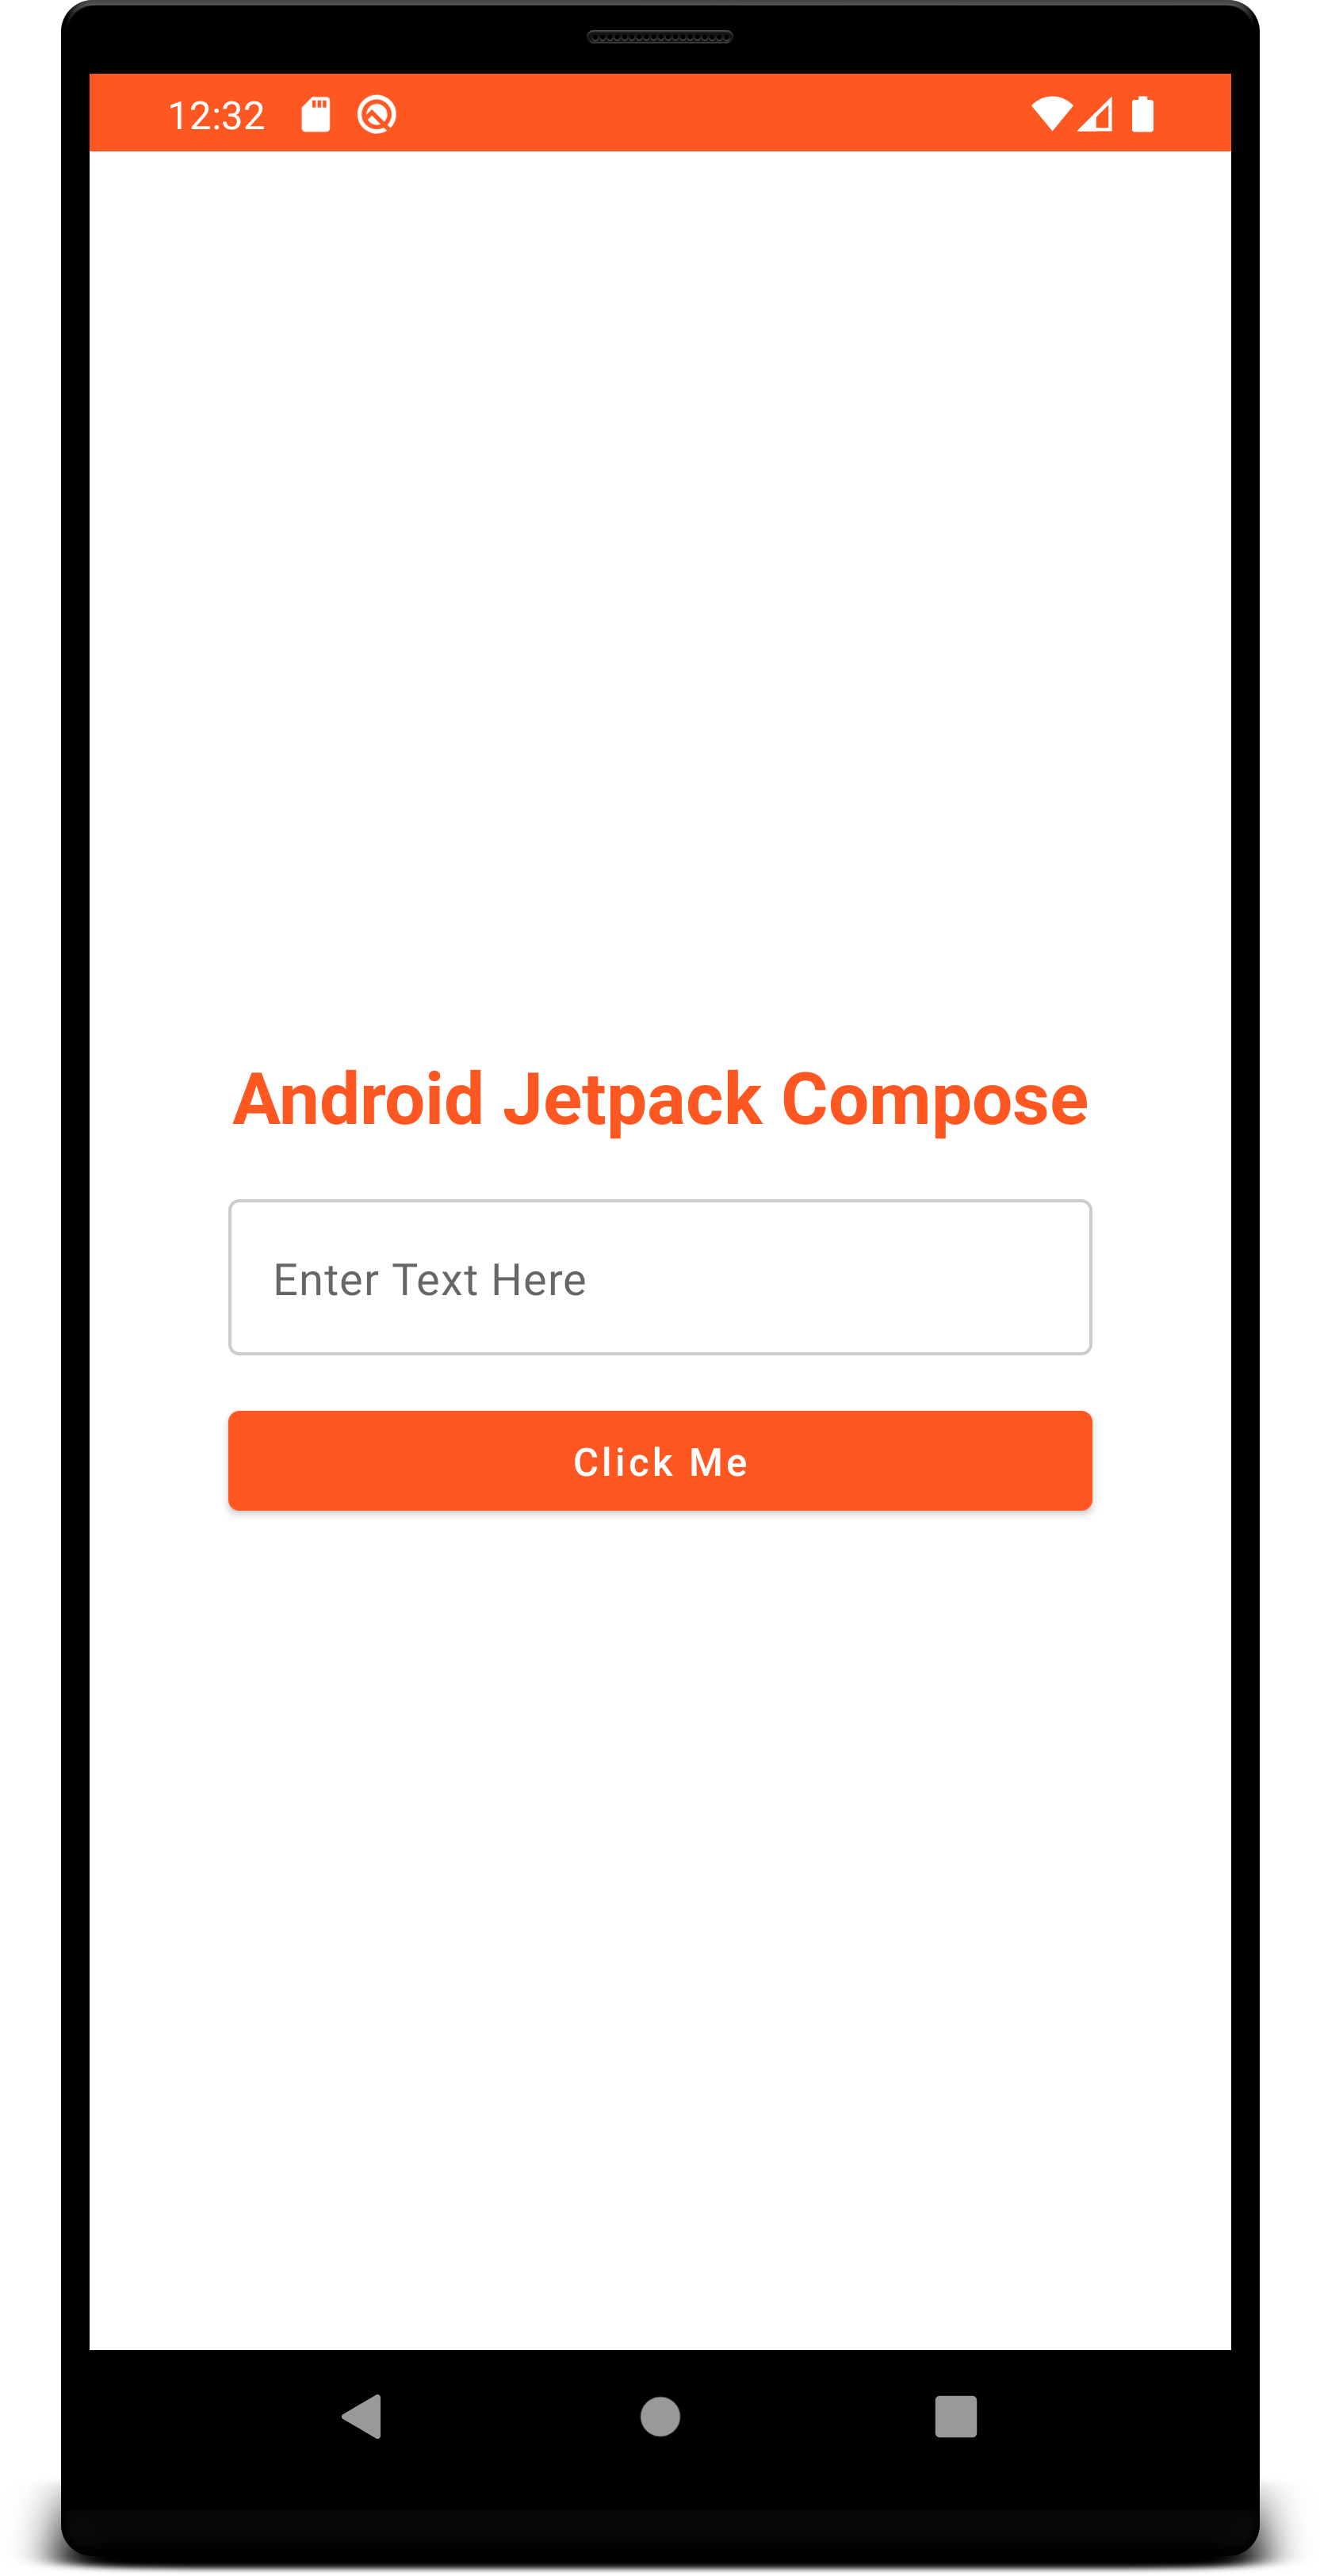 Android Jetpack Composer Screen on Mobile Device